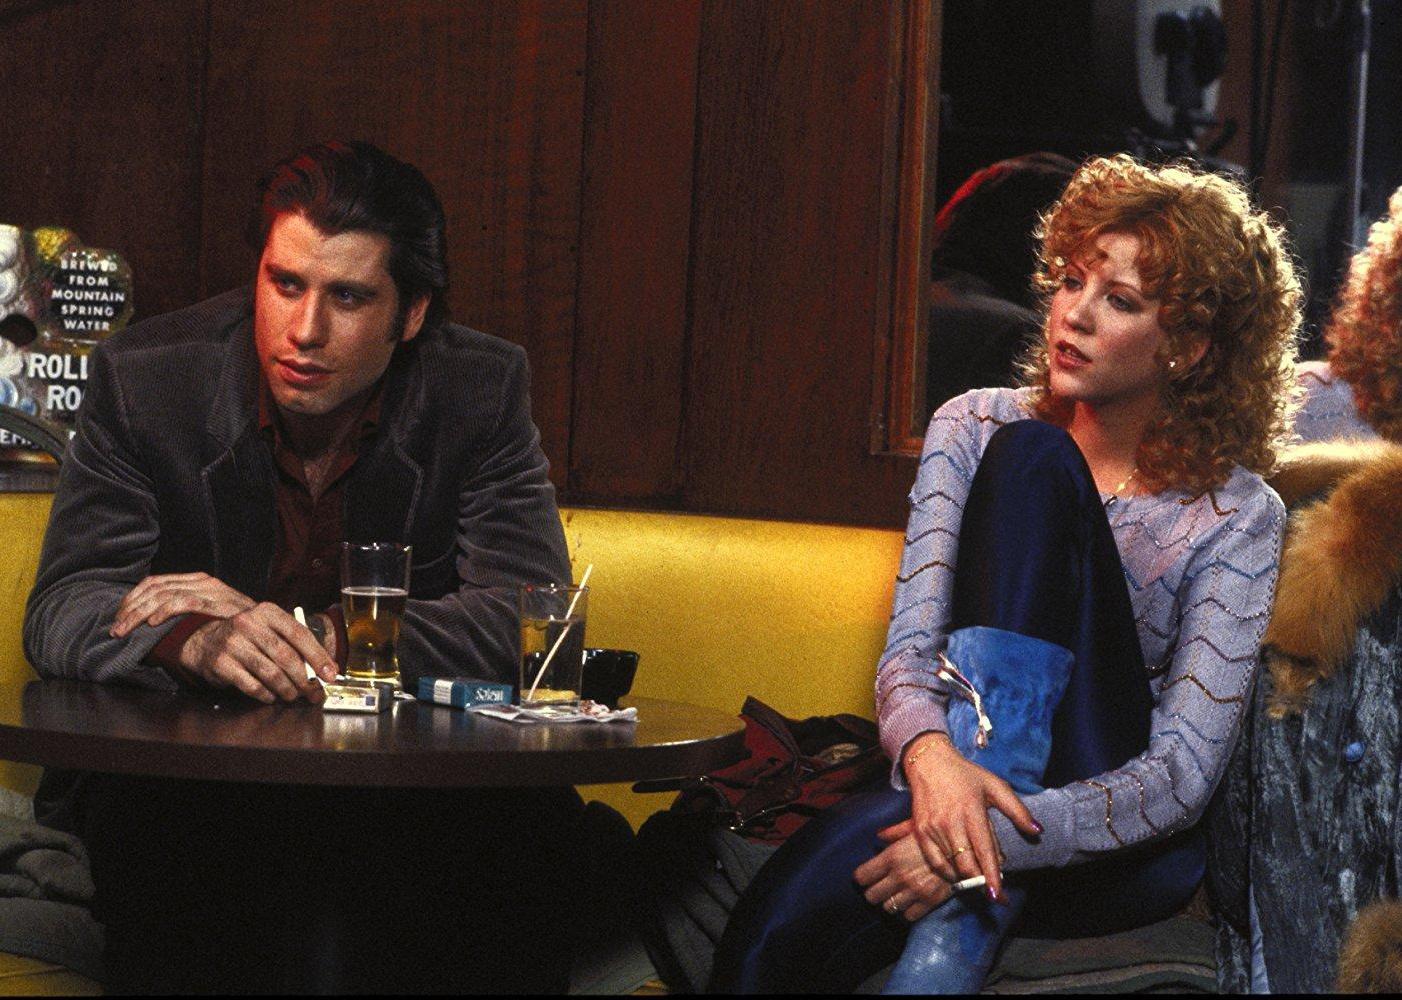 John Travolta drinking beers at a booth with a woman.